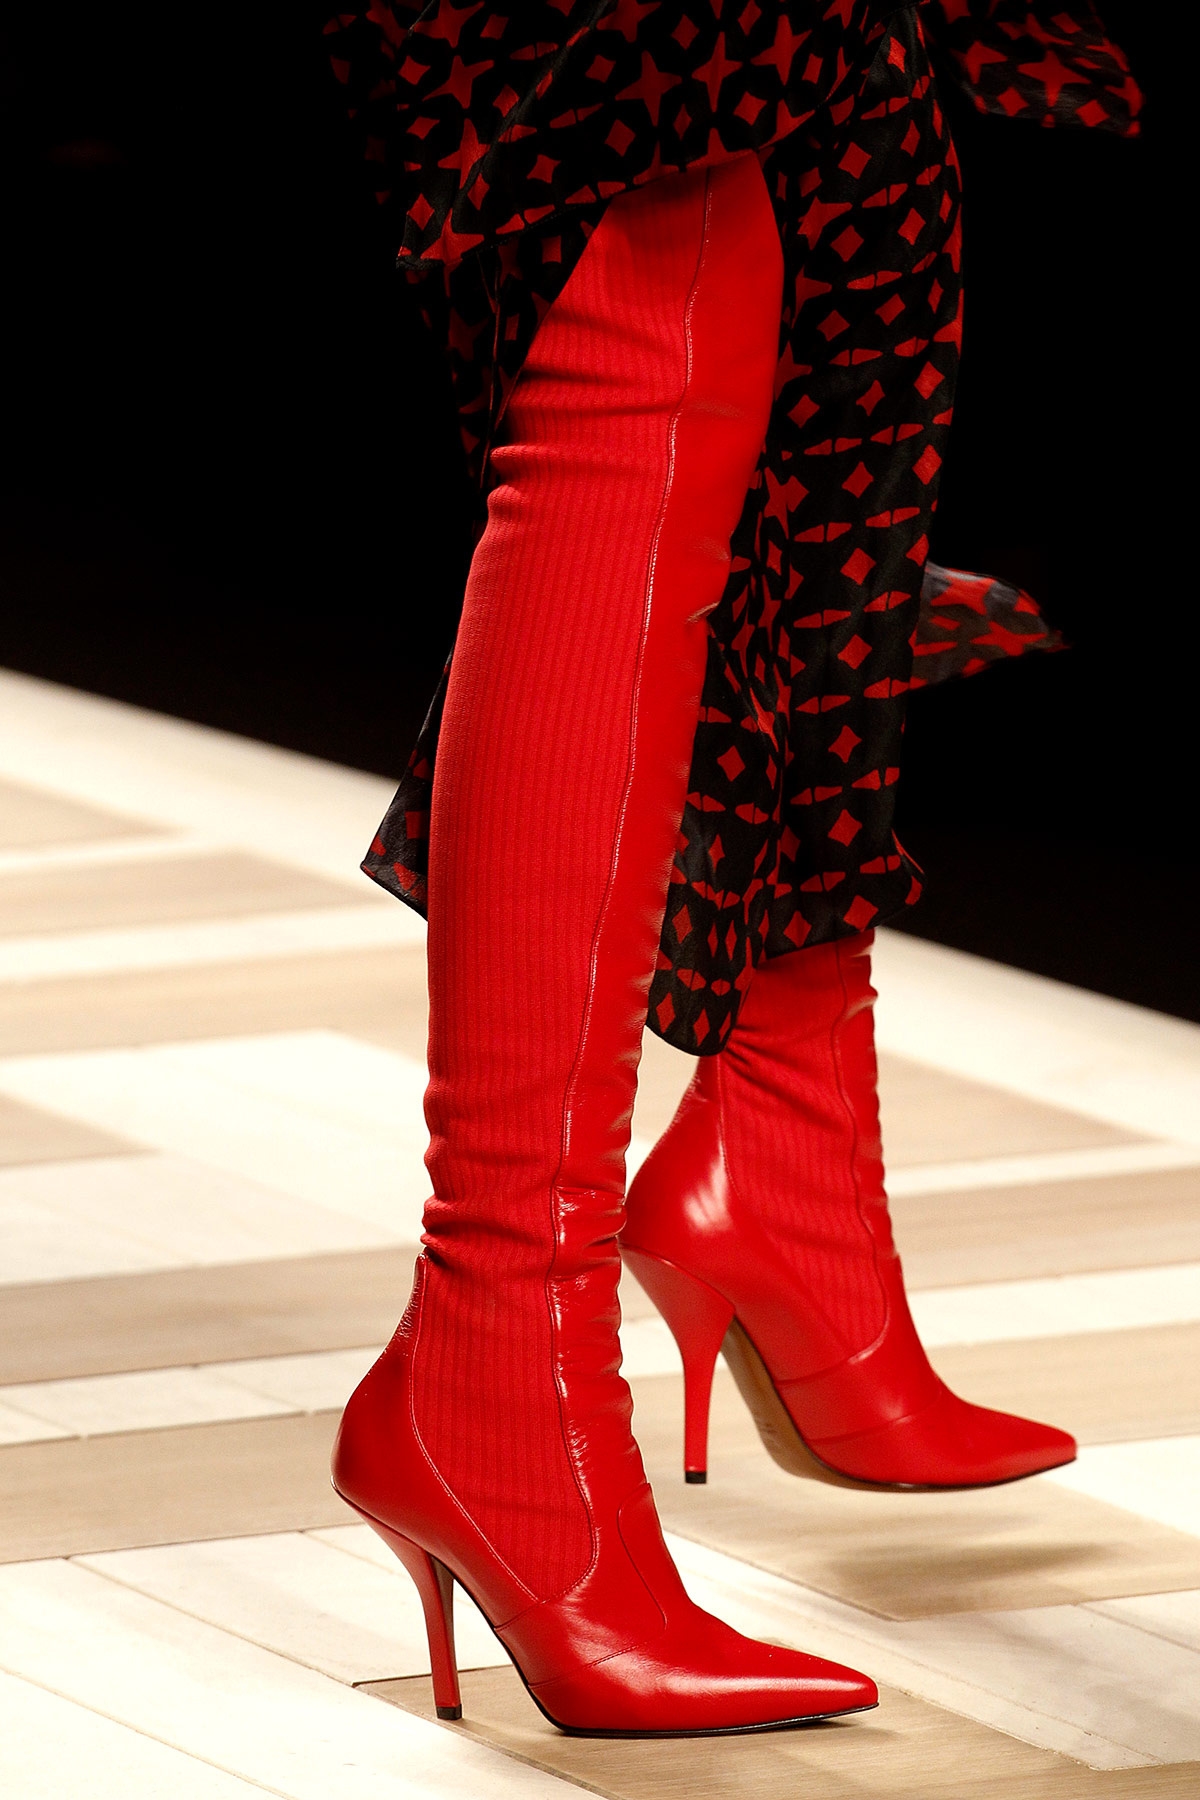 The New Fall Season Must-Have: Over-the-Knee Boots